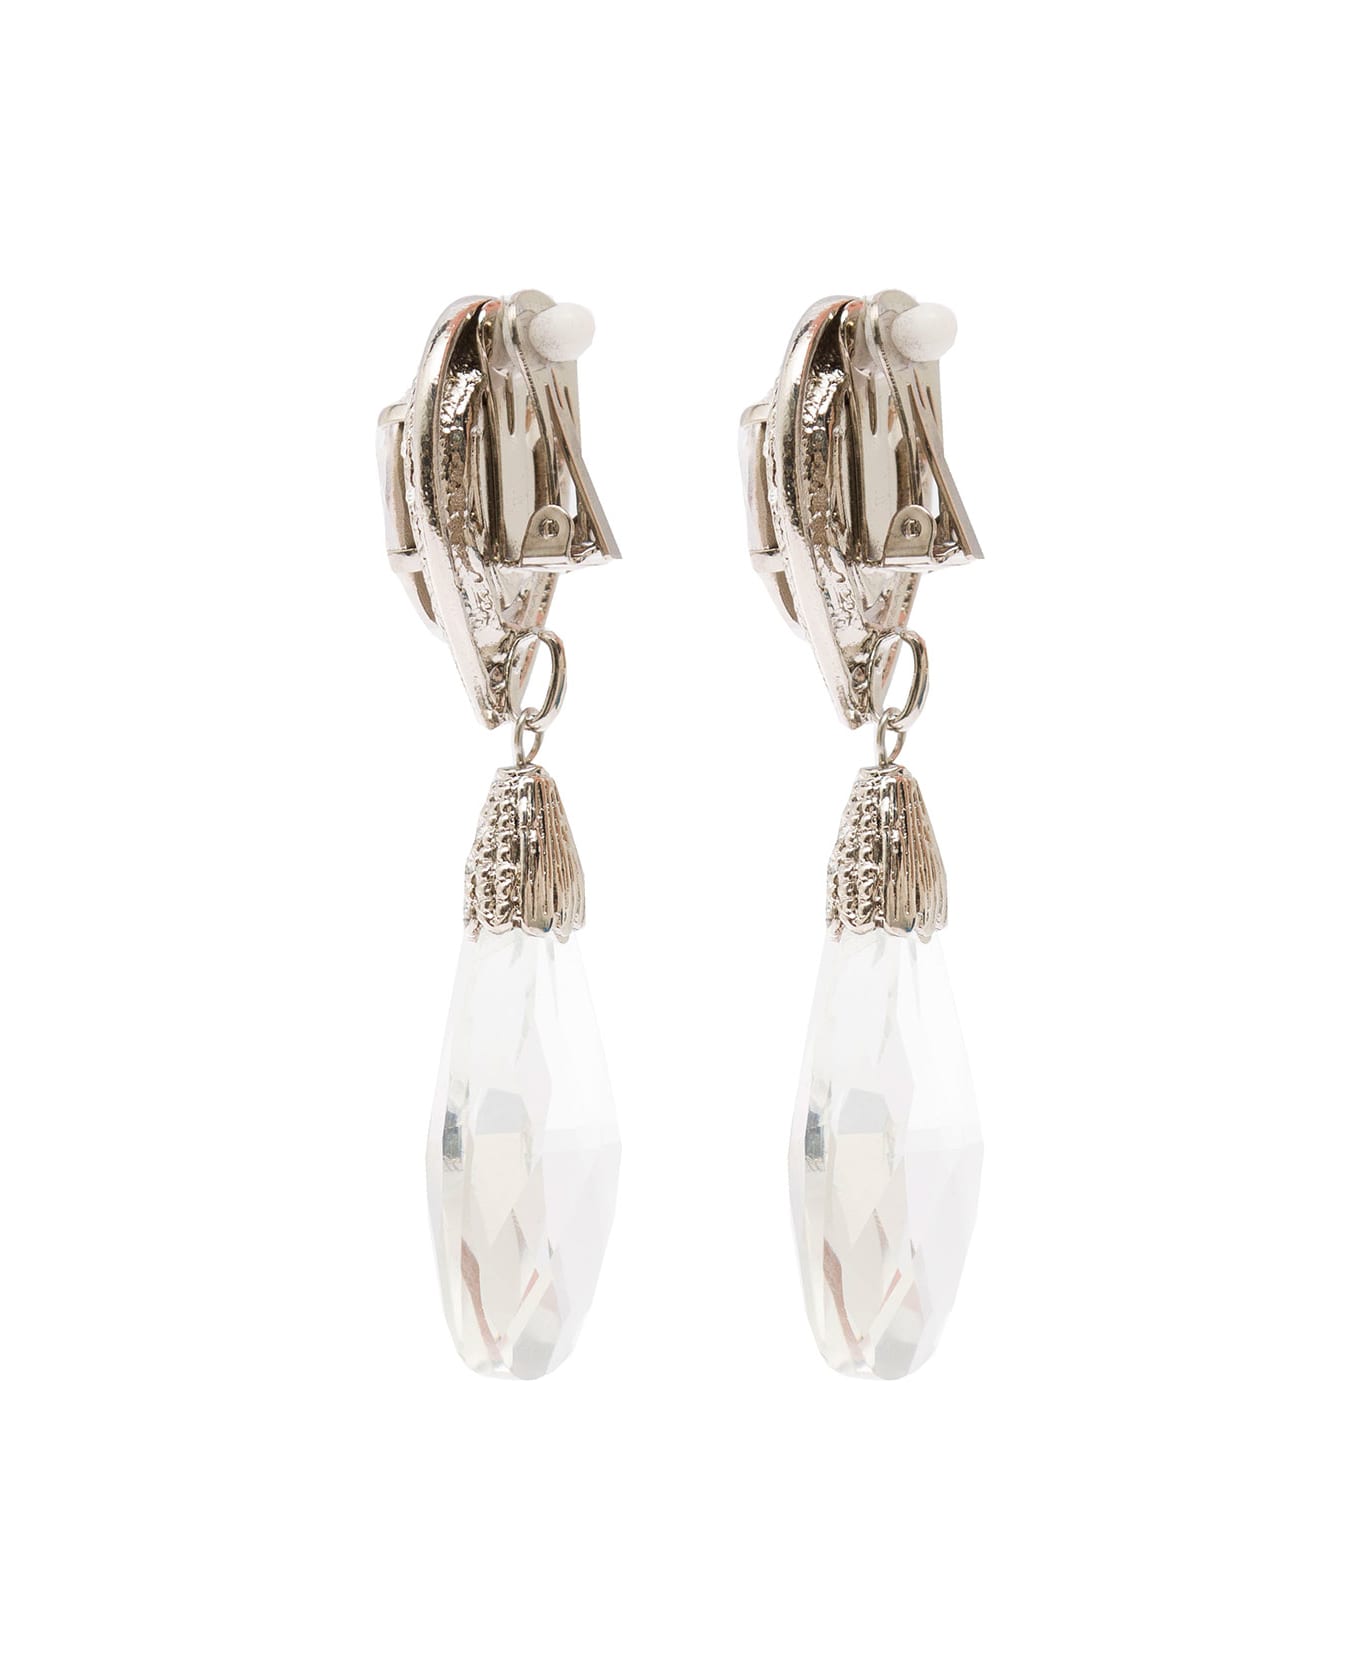 Alessandra Rich Earrings With Crystal Drop - SILVER